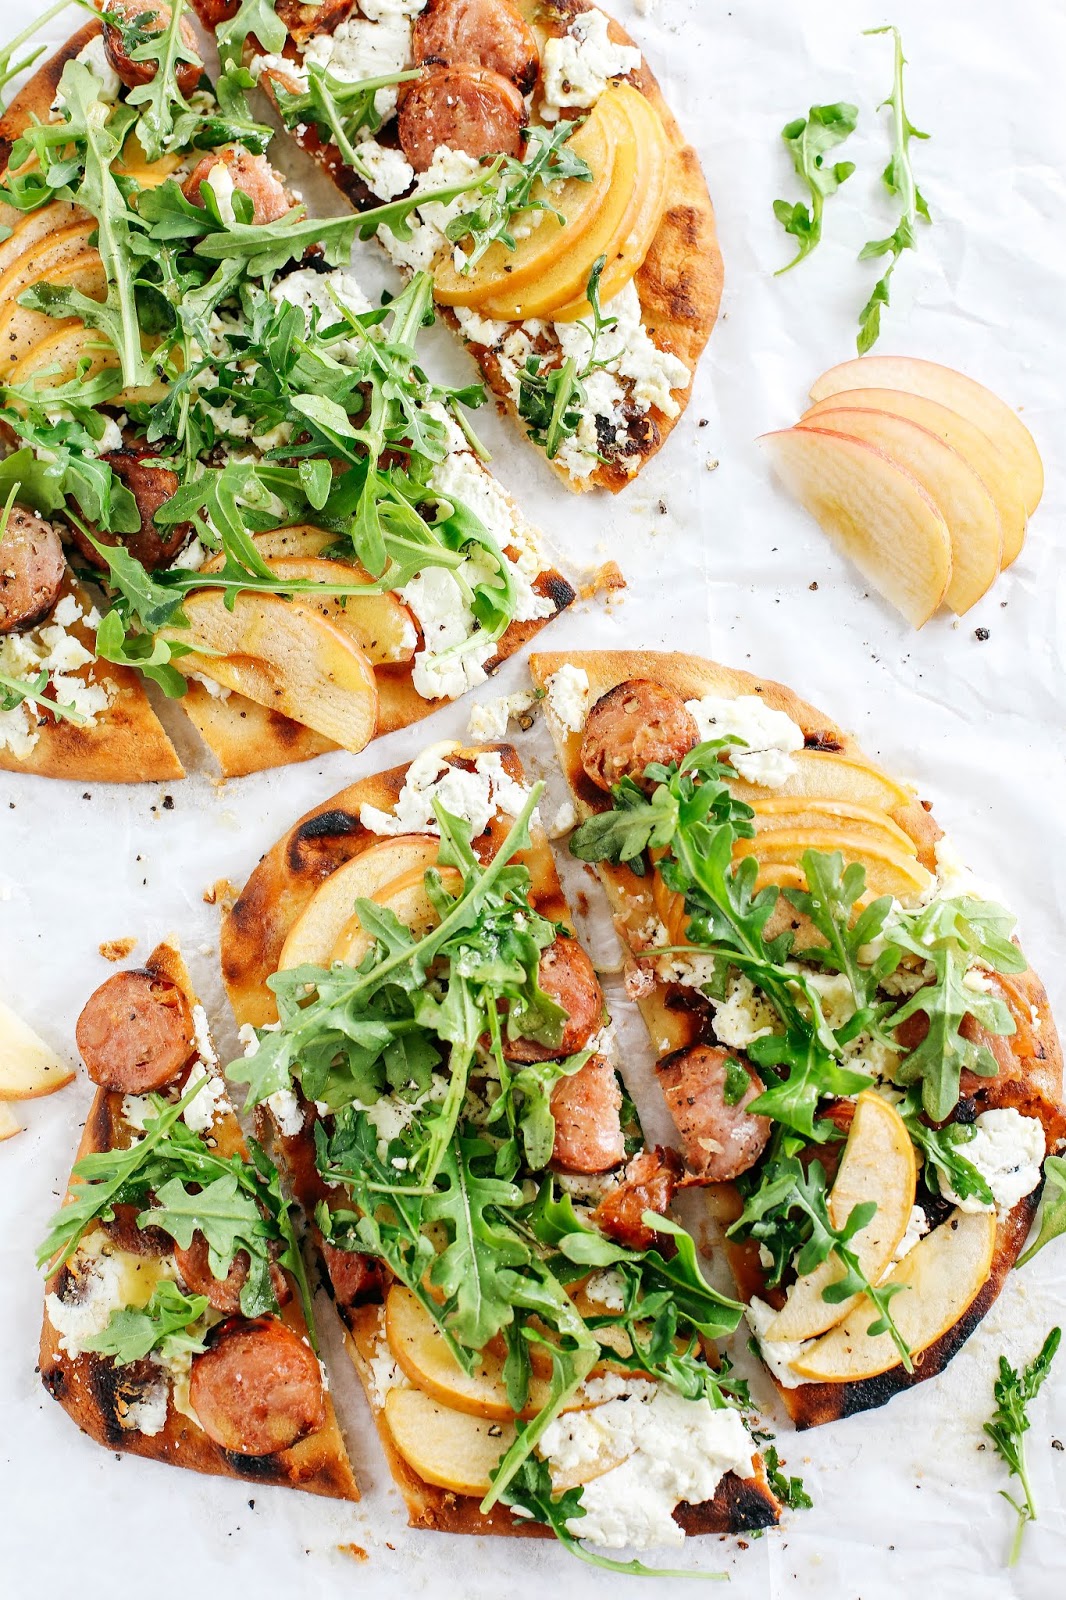 GRILLED SAUSAGE & APPLE PIZZA WITH GOAT CHEESE | HEALTY FOOD